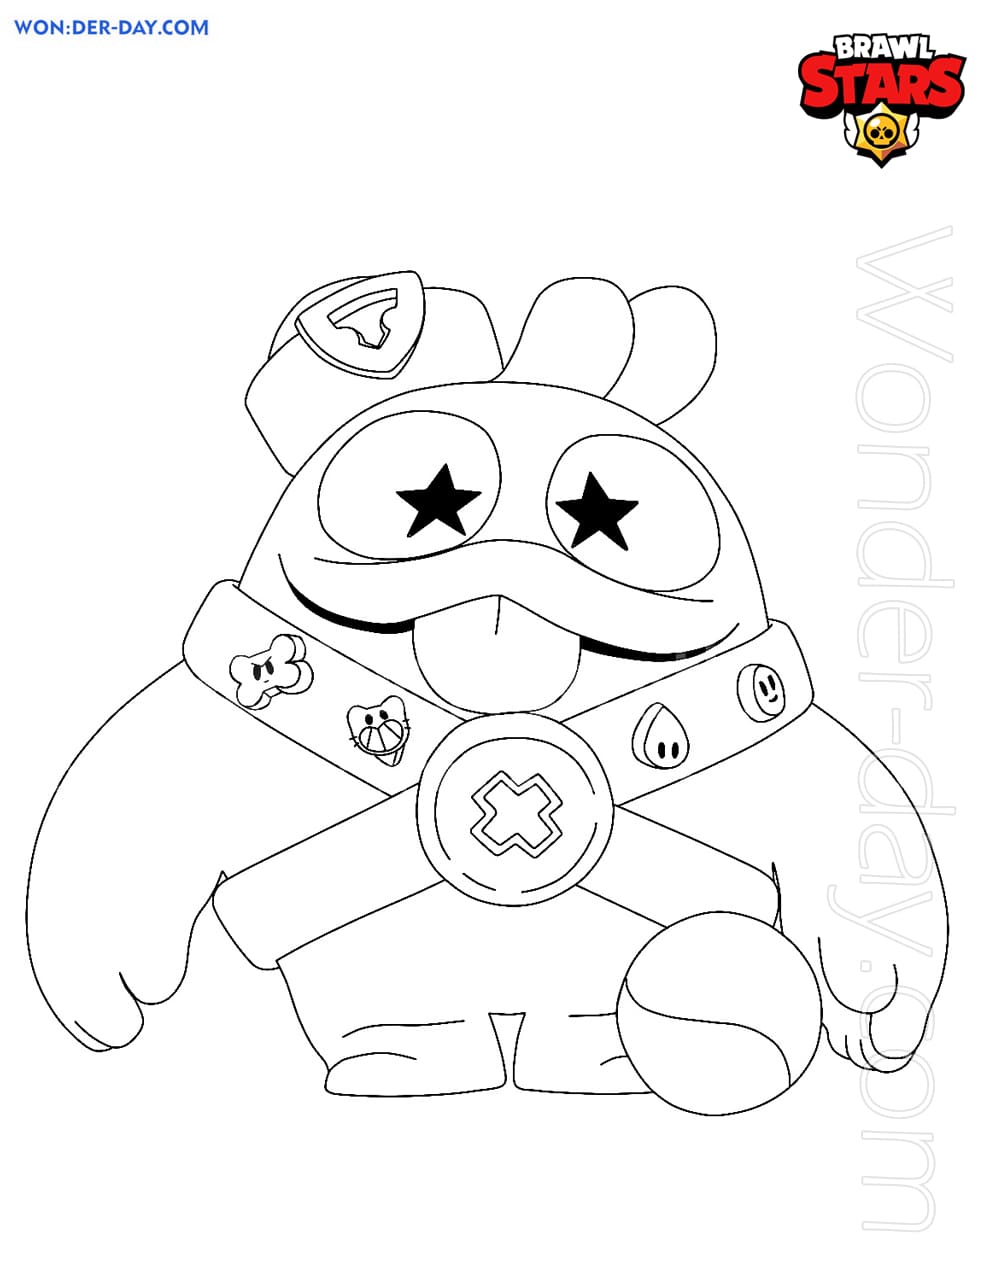 Squeak Brawl Stars Coloring Pages Wonder Day Coloring Pages For Children And Adults - brawl stars belle coloring pages